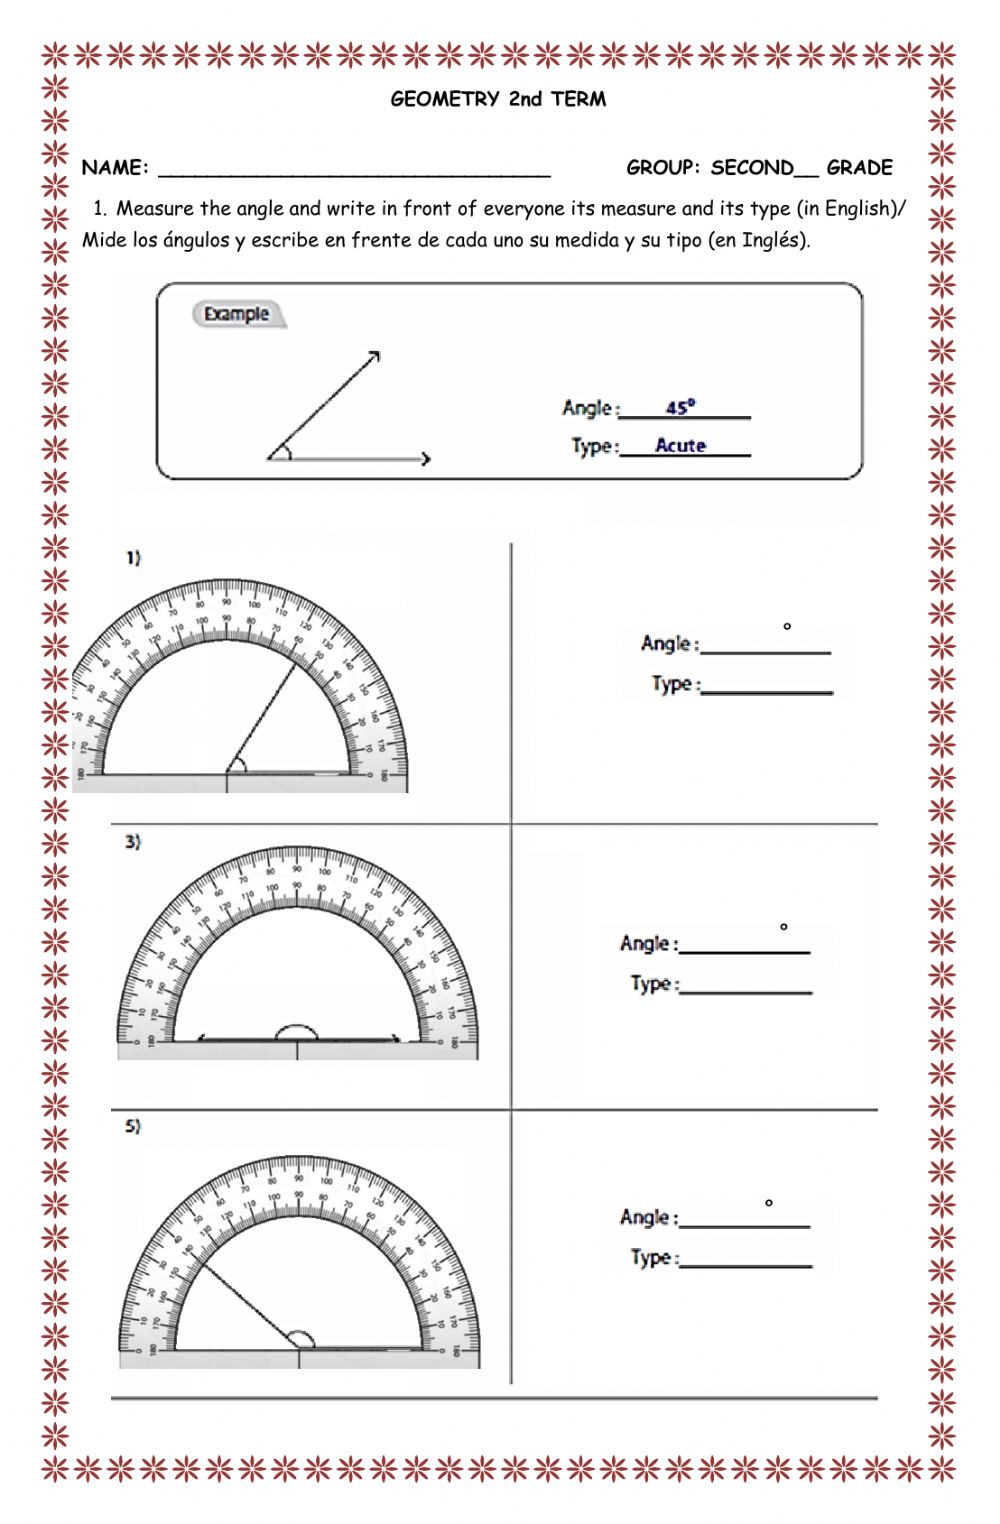 Second Grade Geometry Worksheets Evaluation Second Term Second Grade Geometry Interactive